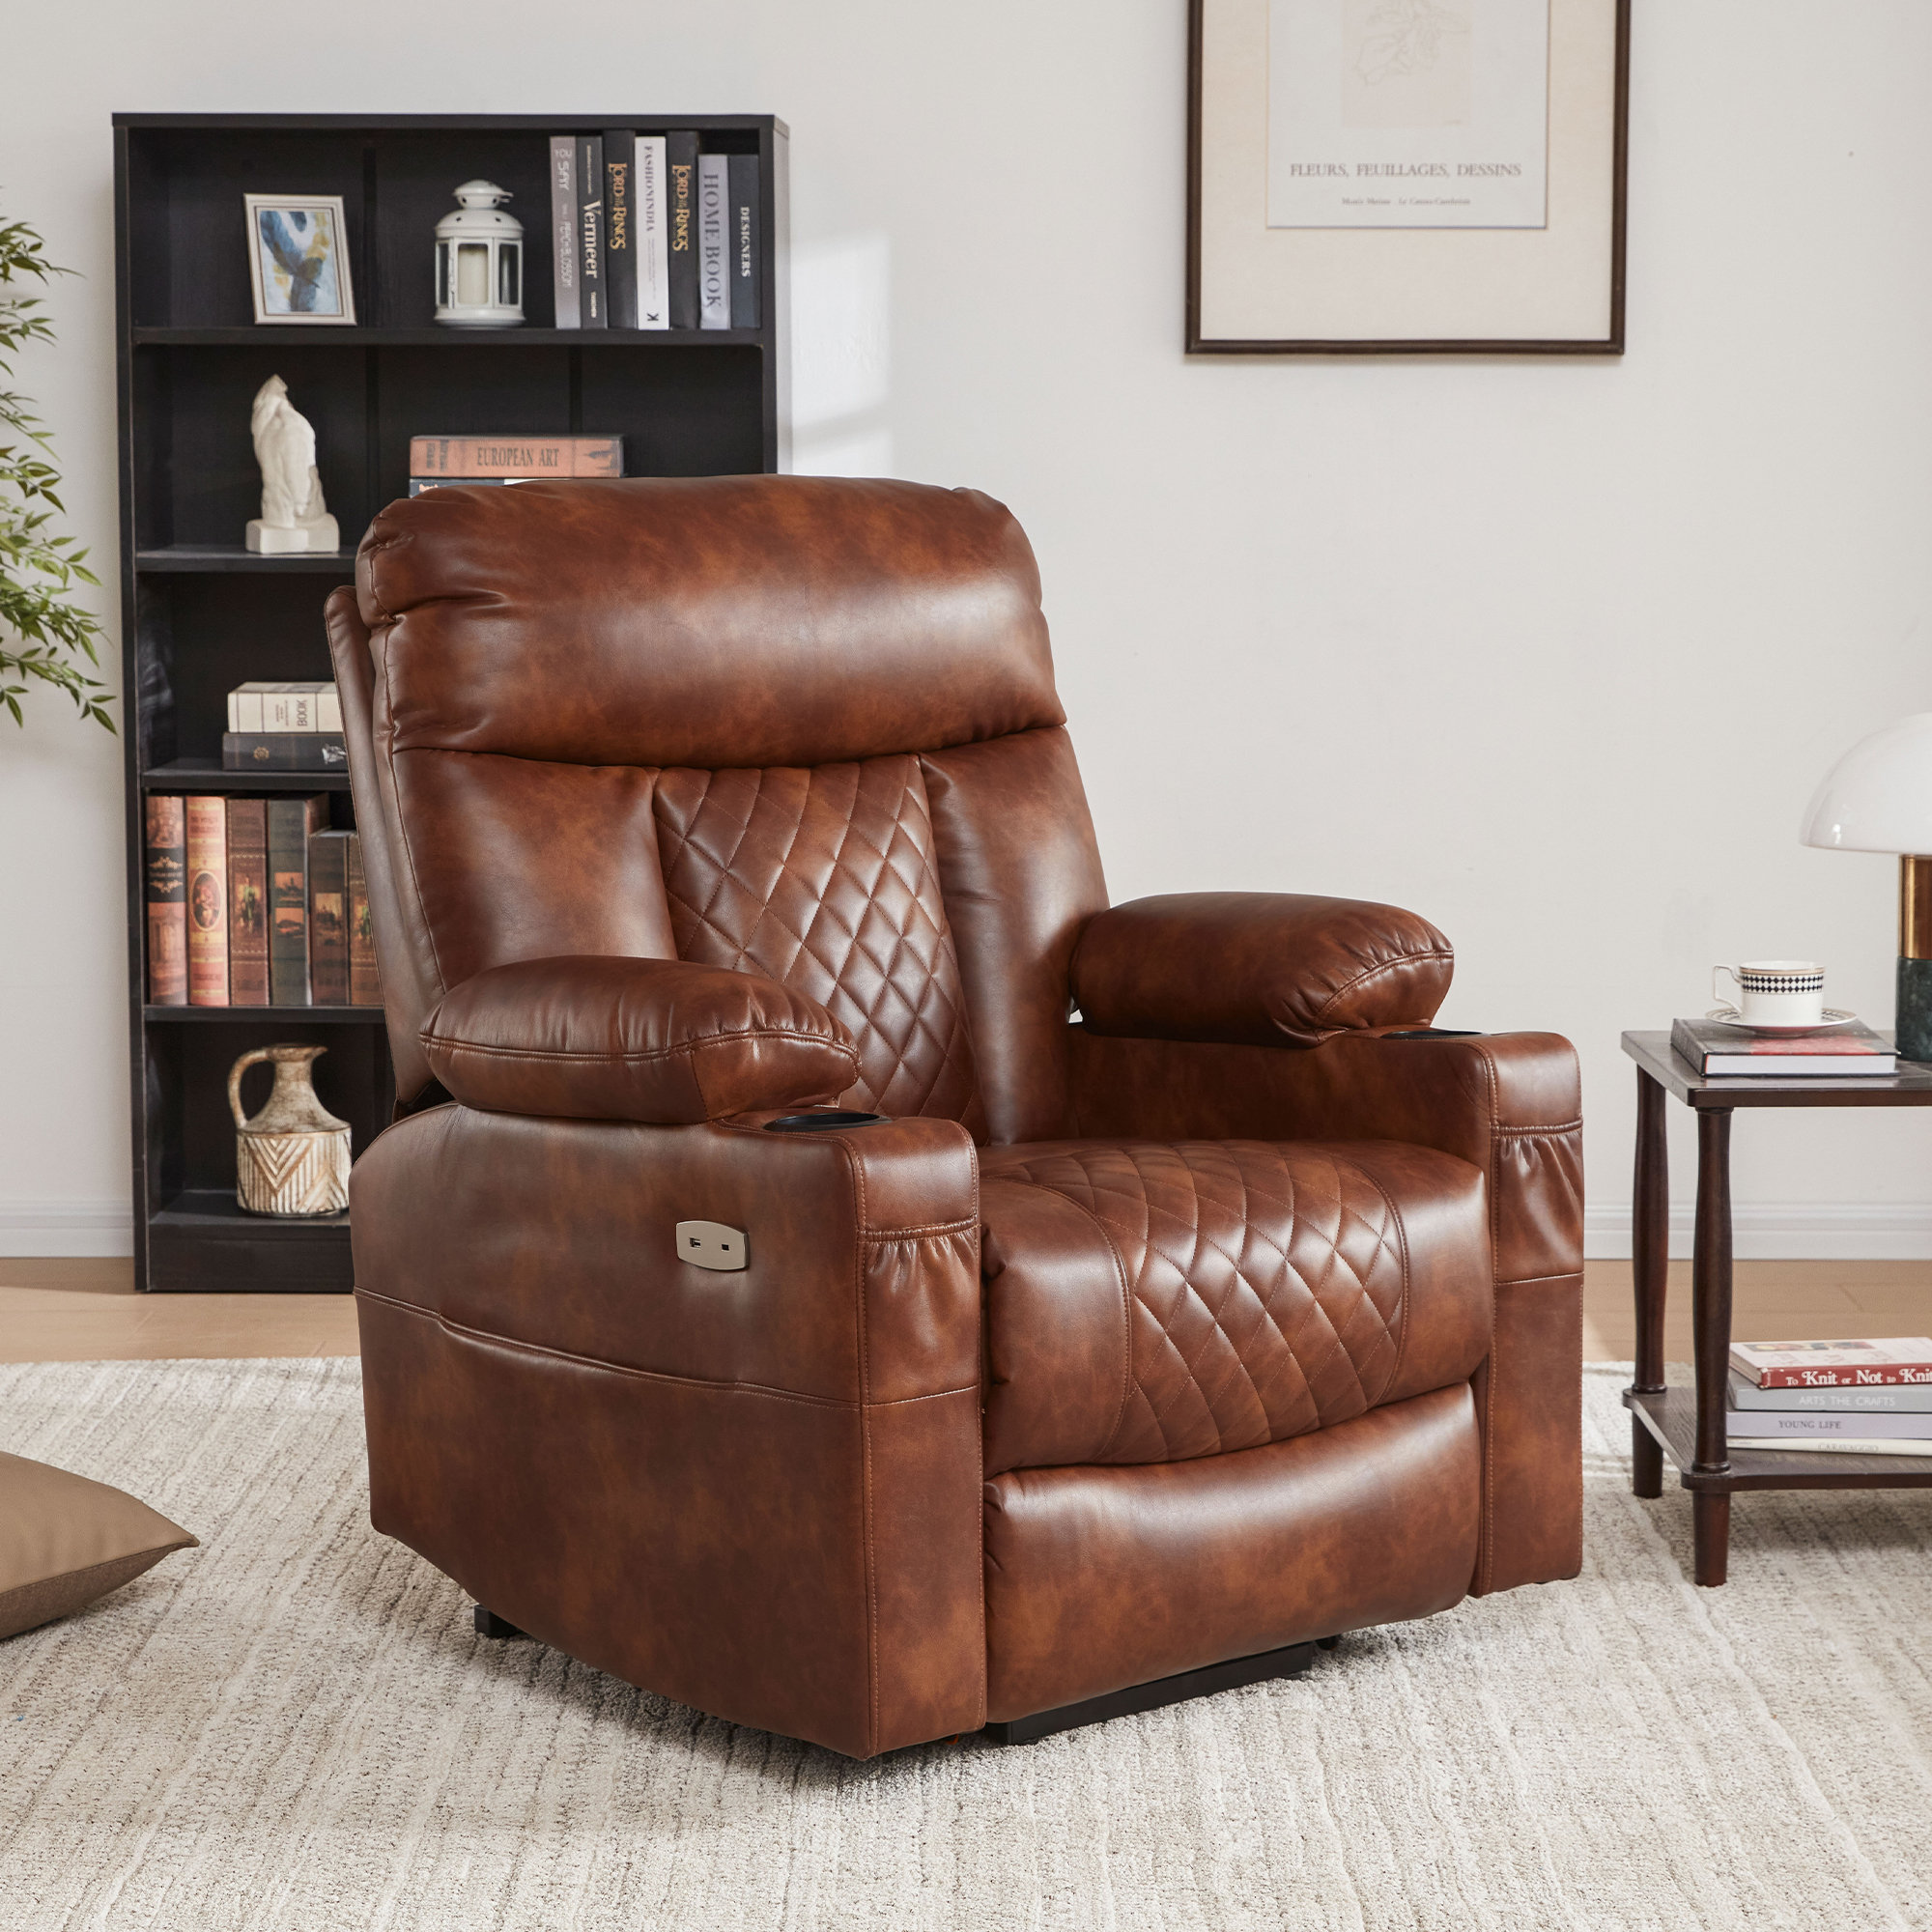 Functions with & Vegan Power Lift Bislim Massage Chair and Recliner Leather Wayfair Reviews Wade | Heating Logan®